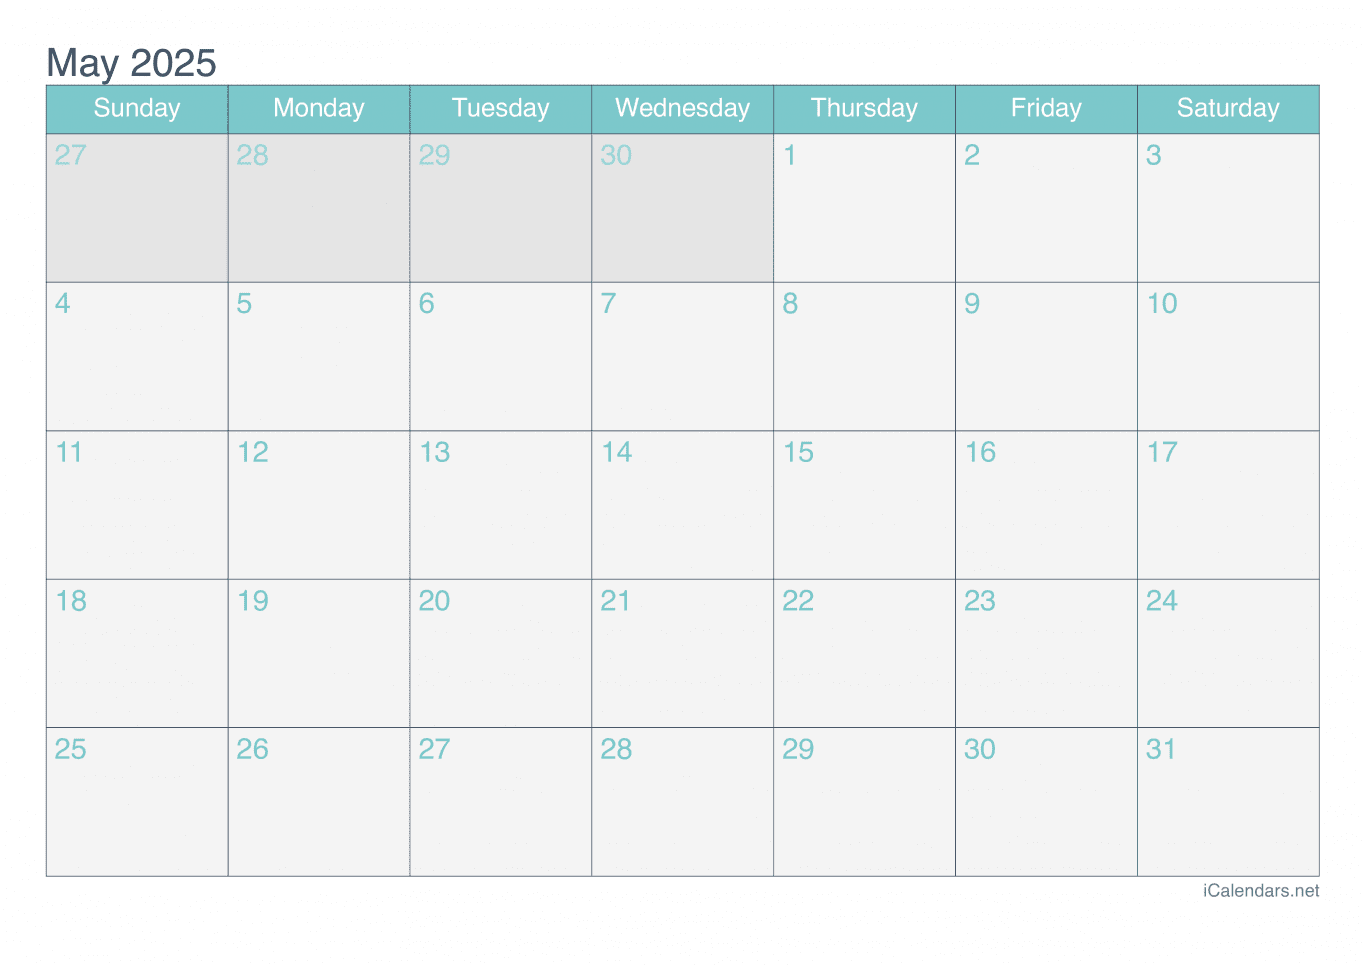 2025 May Calendar - Turquoise